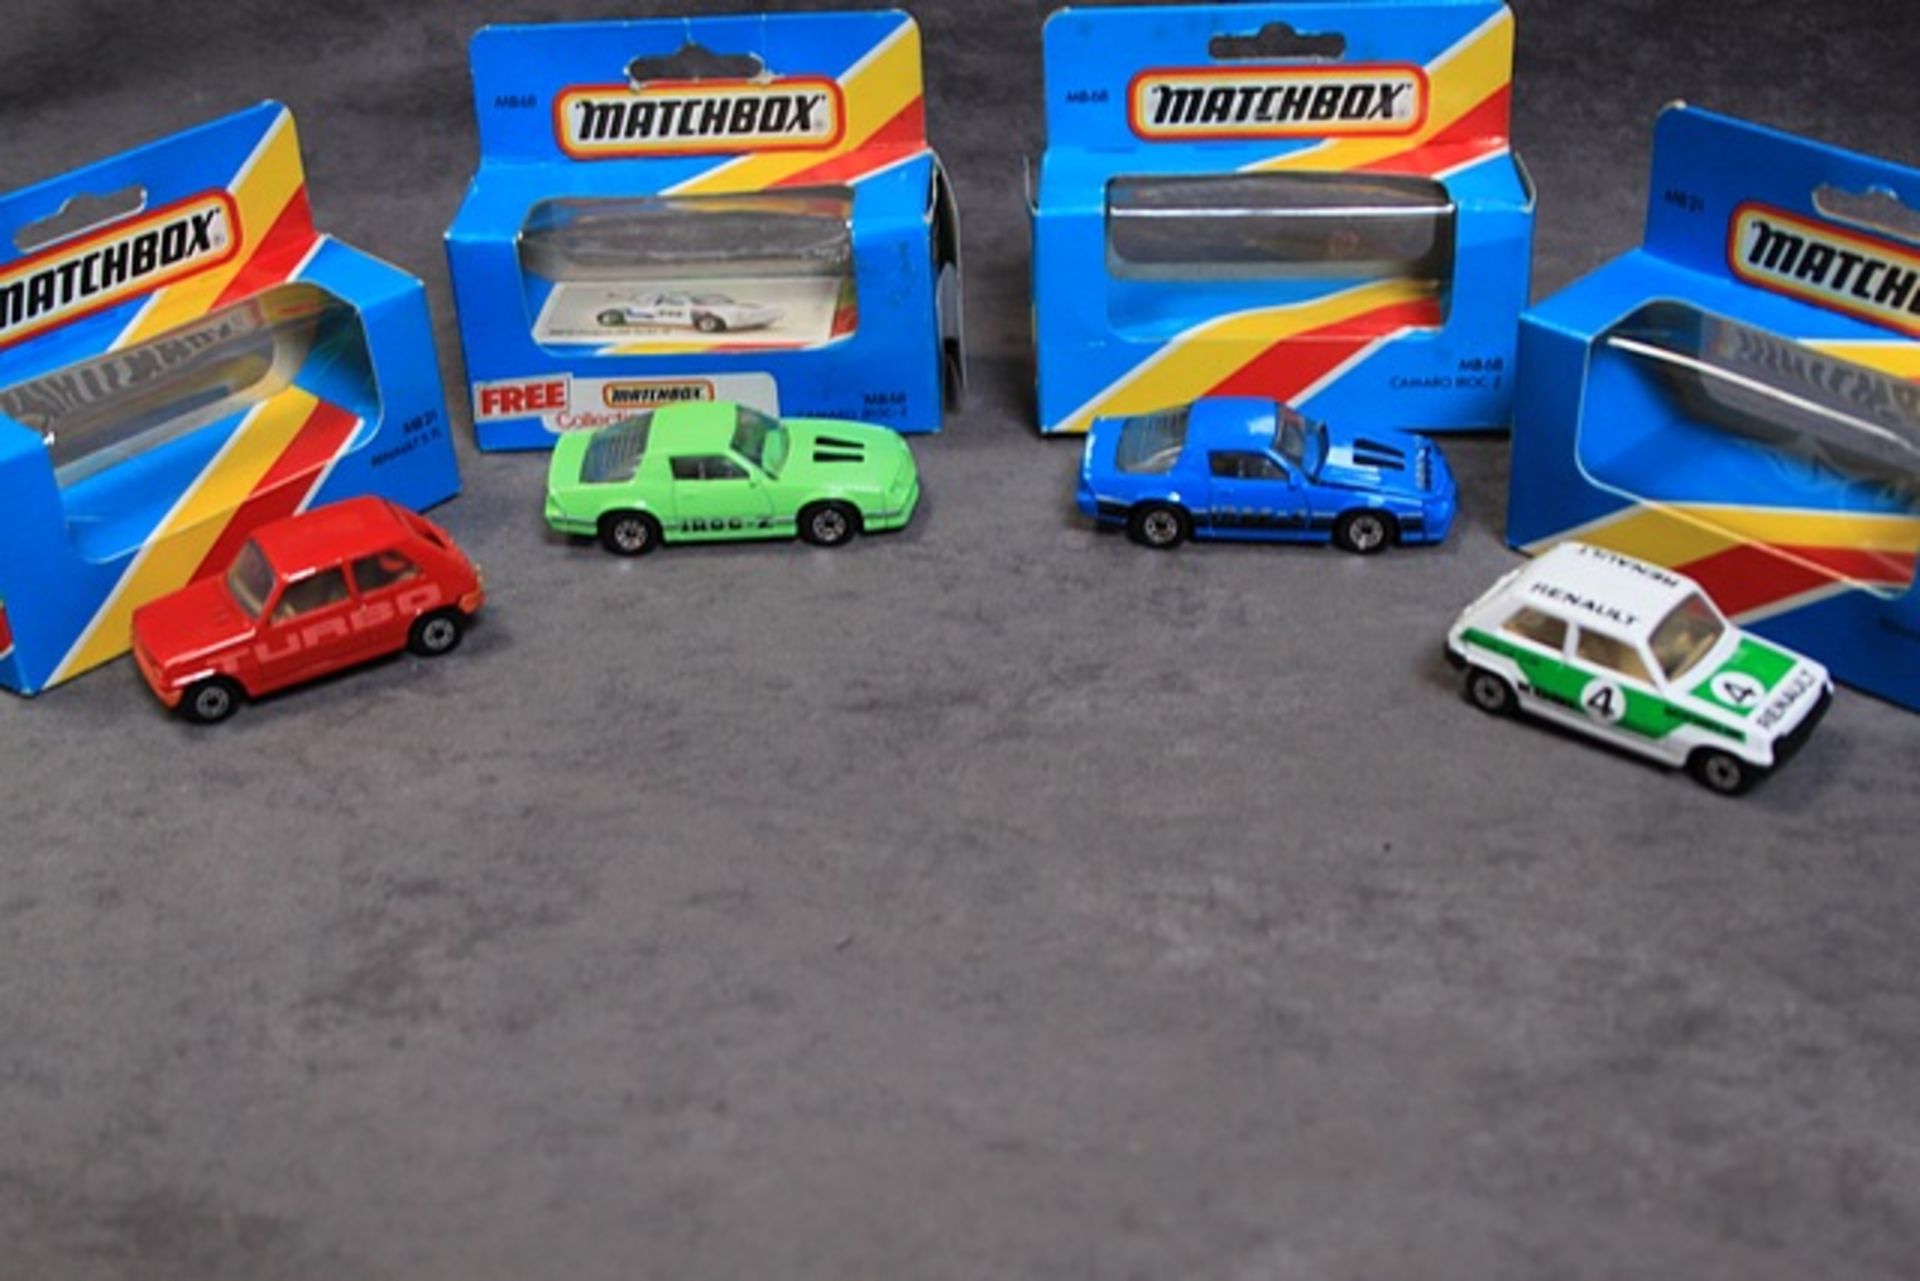 4 X Matchbox Diecast Models #21 Renault 5 TL Red #21 Renault 5 Rallly Car No4 Green And White #68 - Image 2 of 2